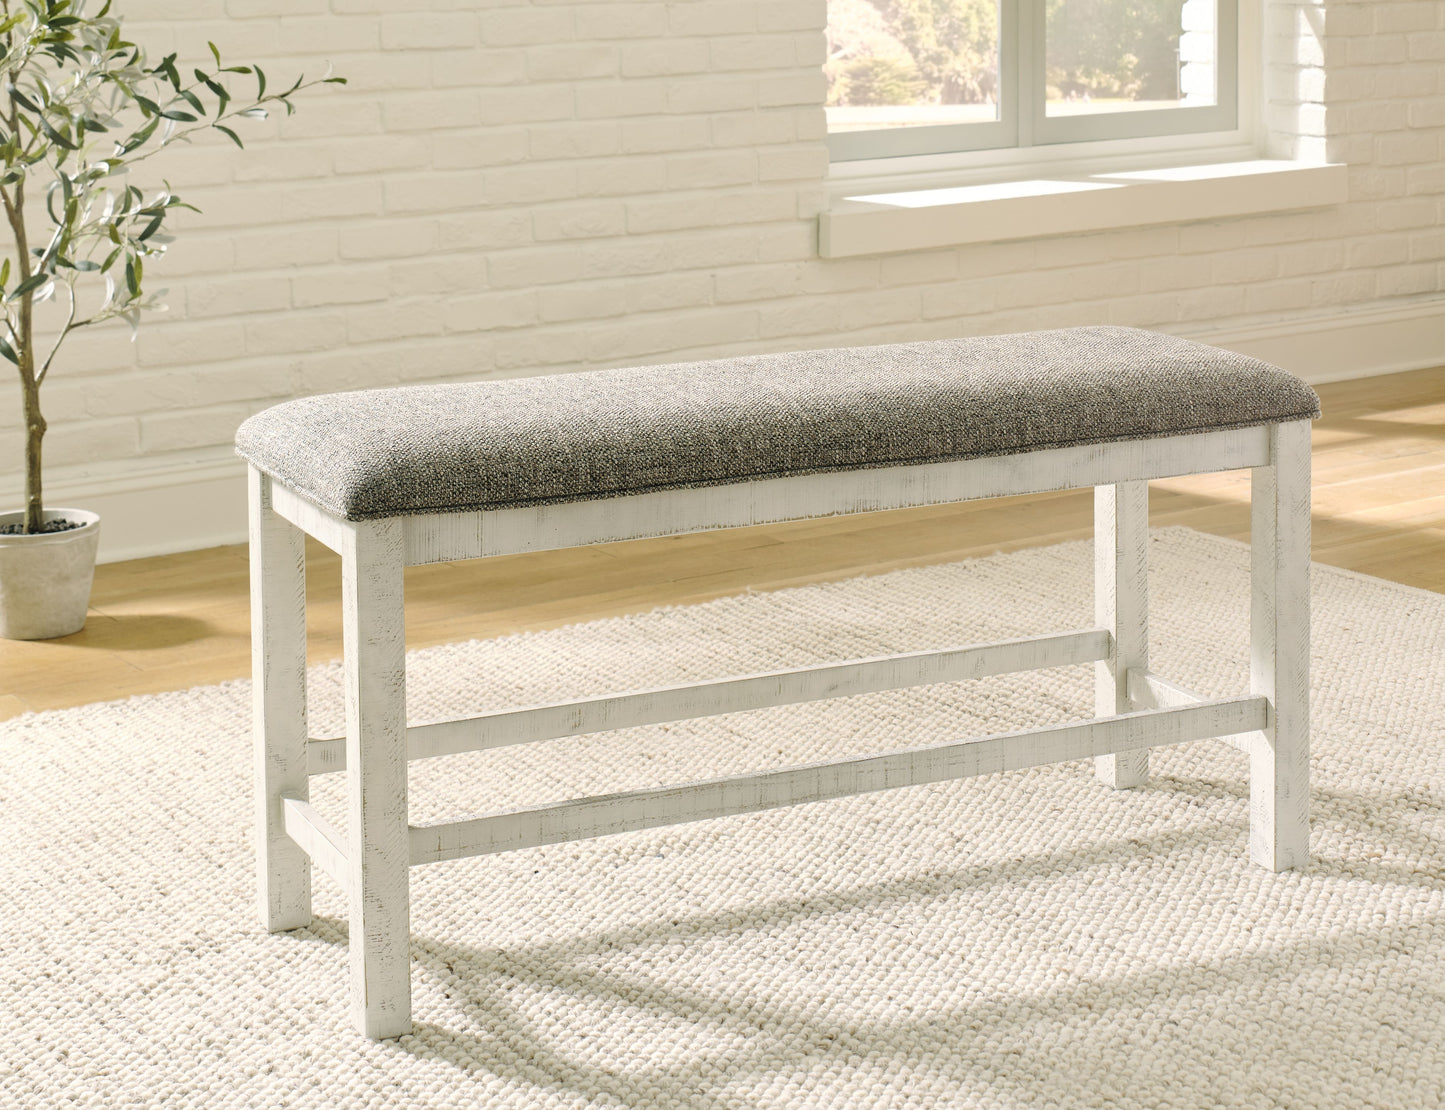 Brewgan - Two-tone - Double Uph Bench